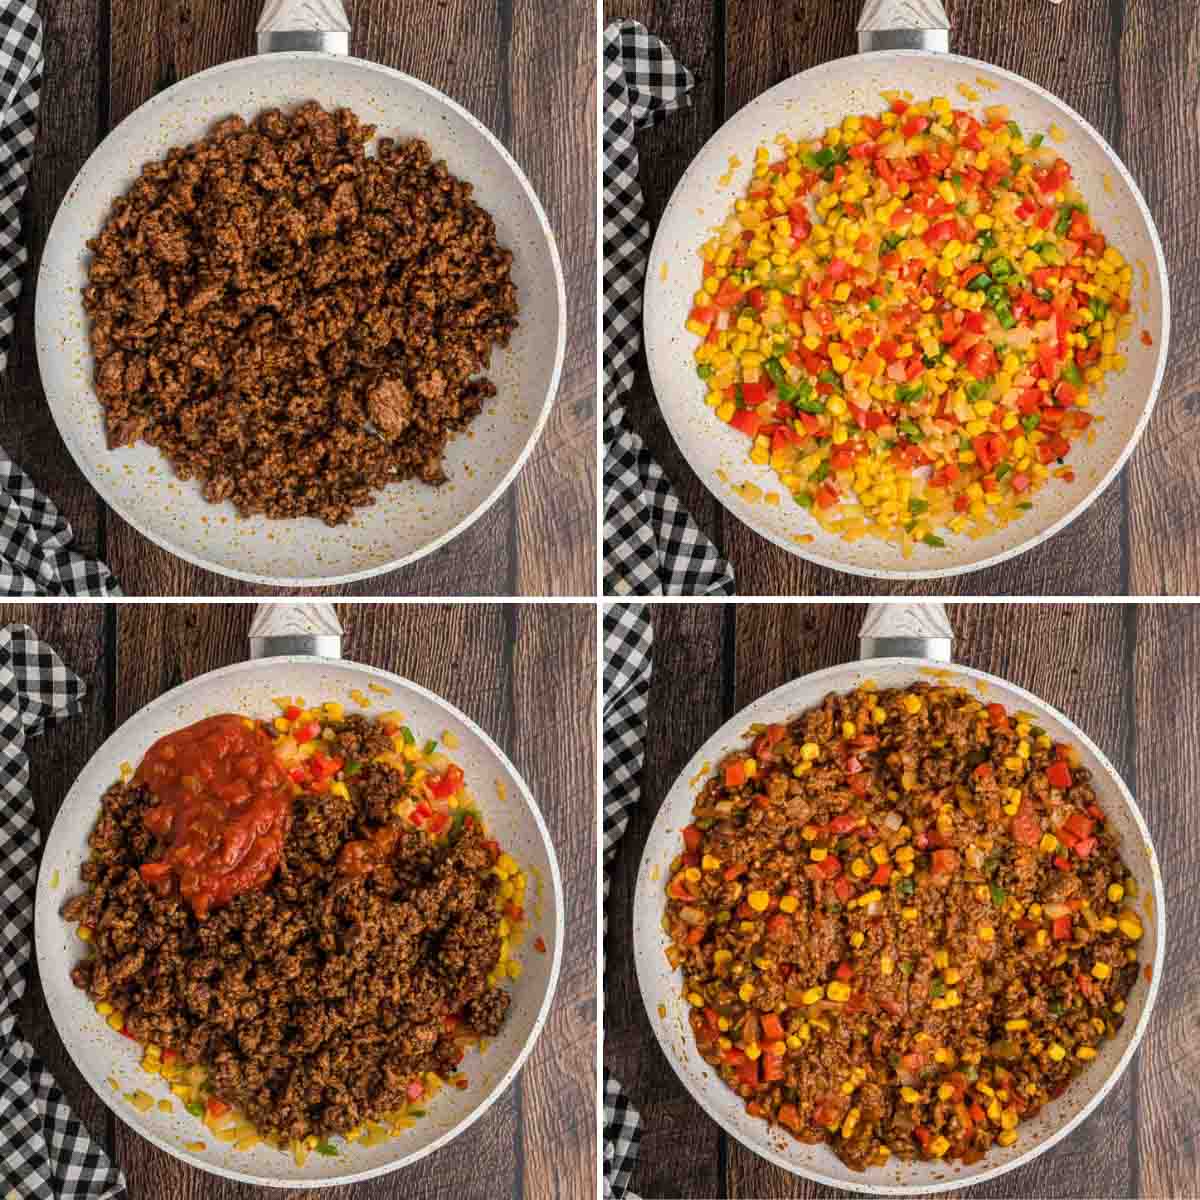 Step by step photos of ground beef and veggies in a skillet with salsa.